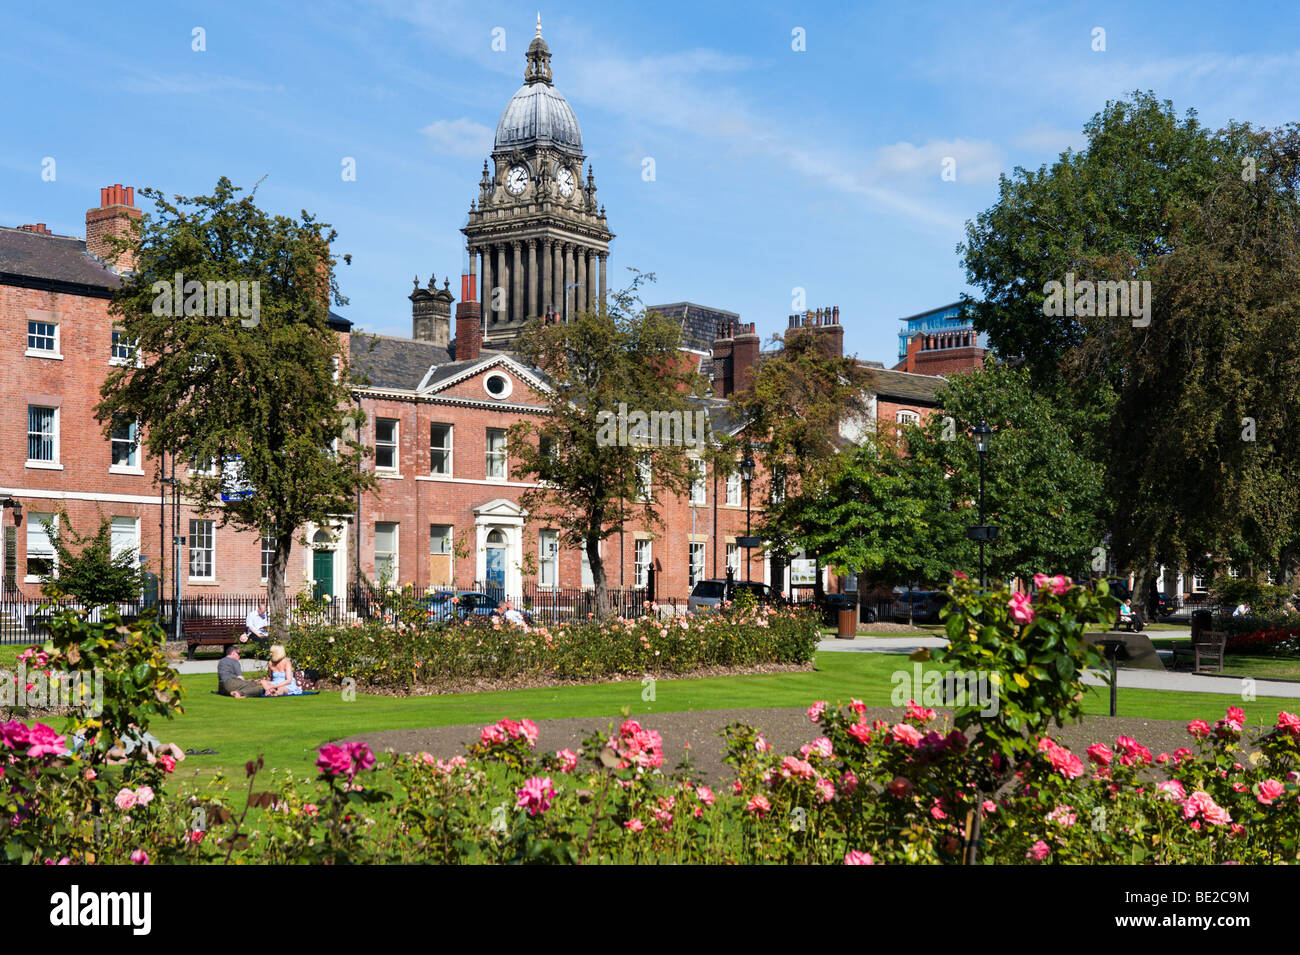 Park Square with the Town Hall clock tower behind, Leeds, West Yorkshire, England Stock Photo